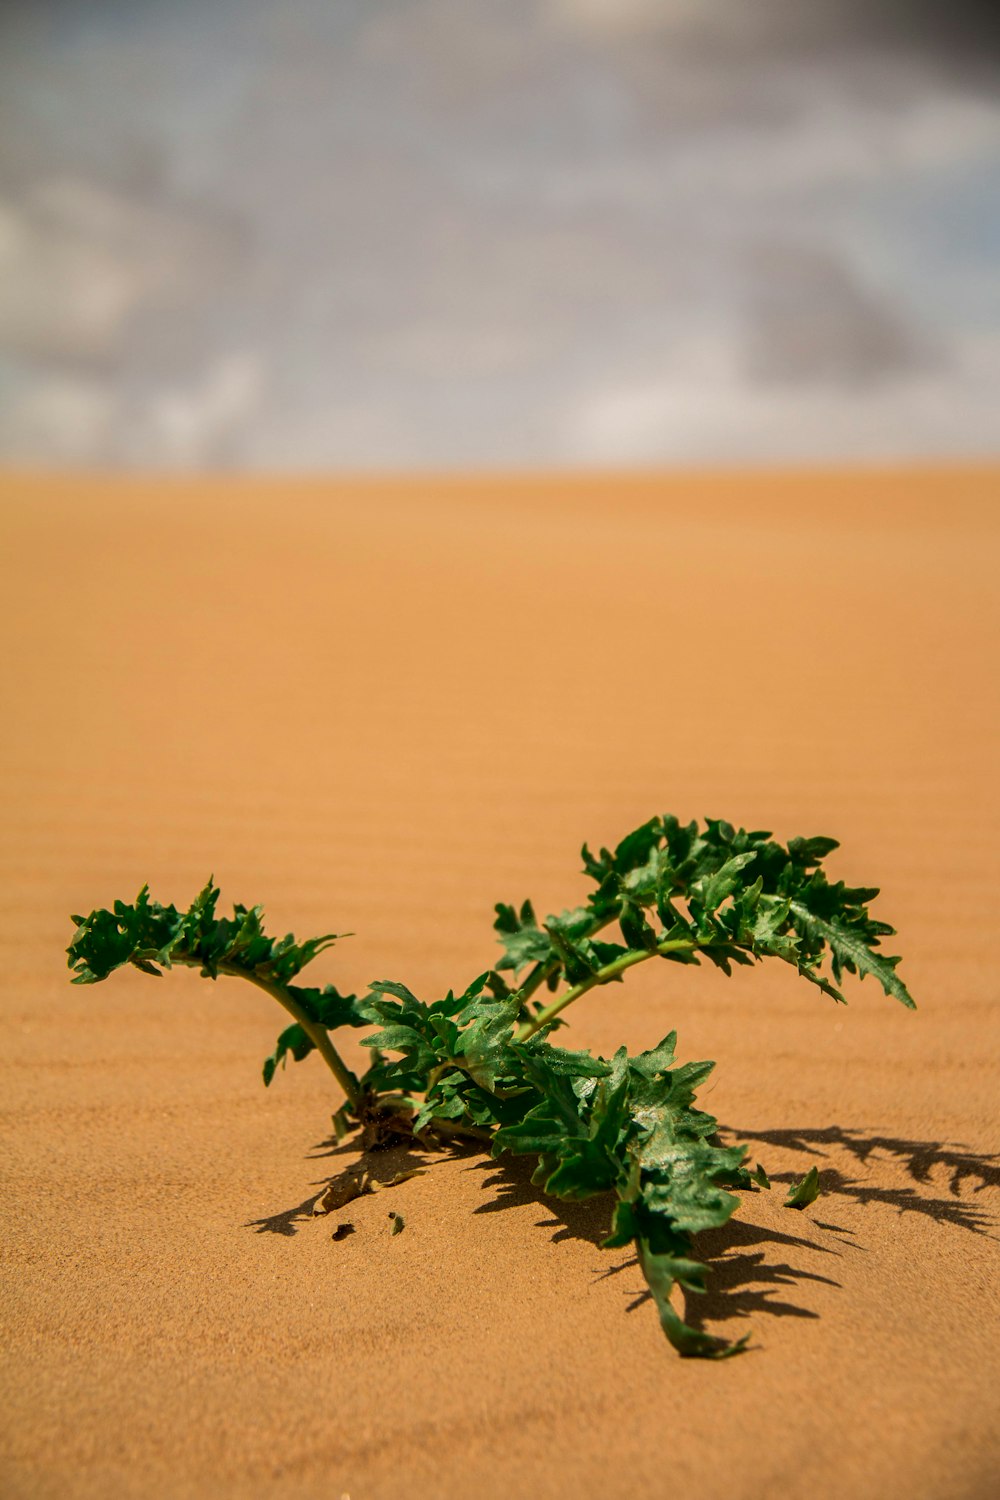 green plant on brown sand during daytime